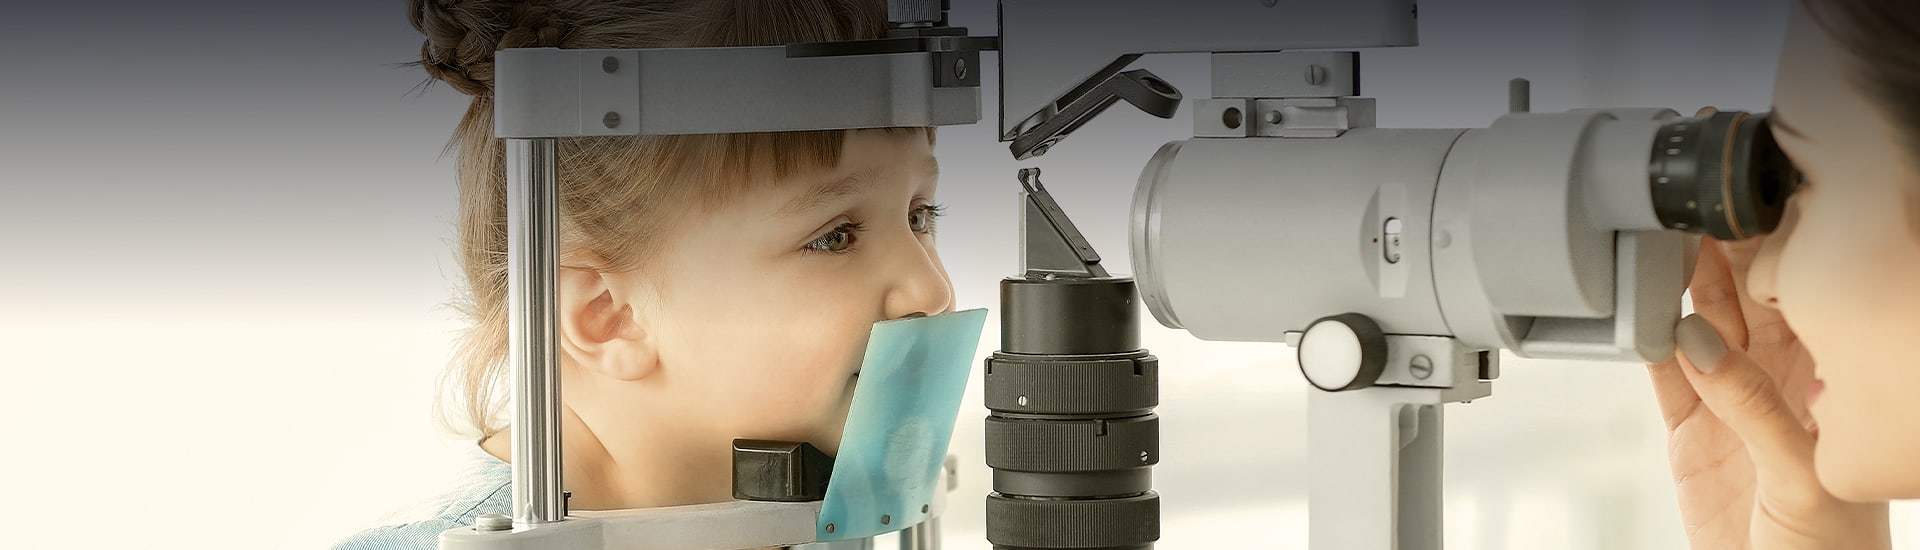 young child getting an eye exam